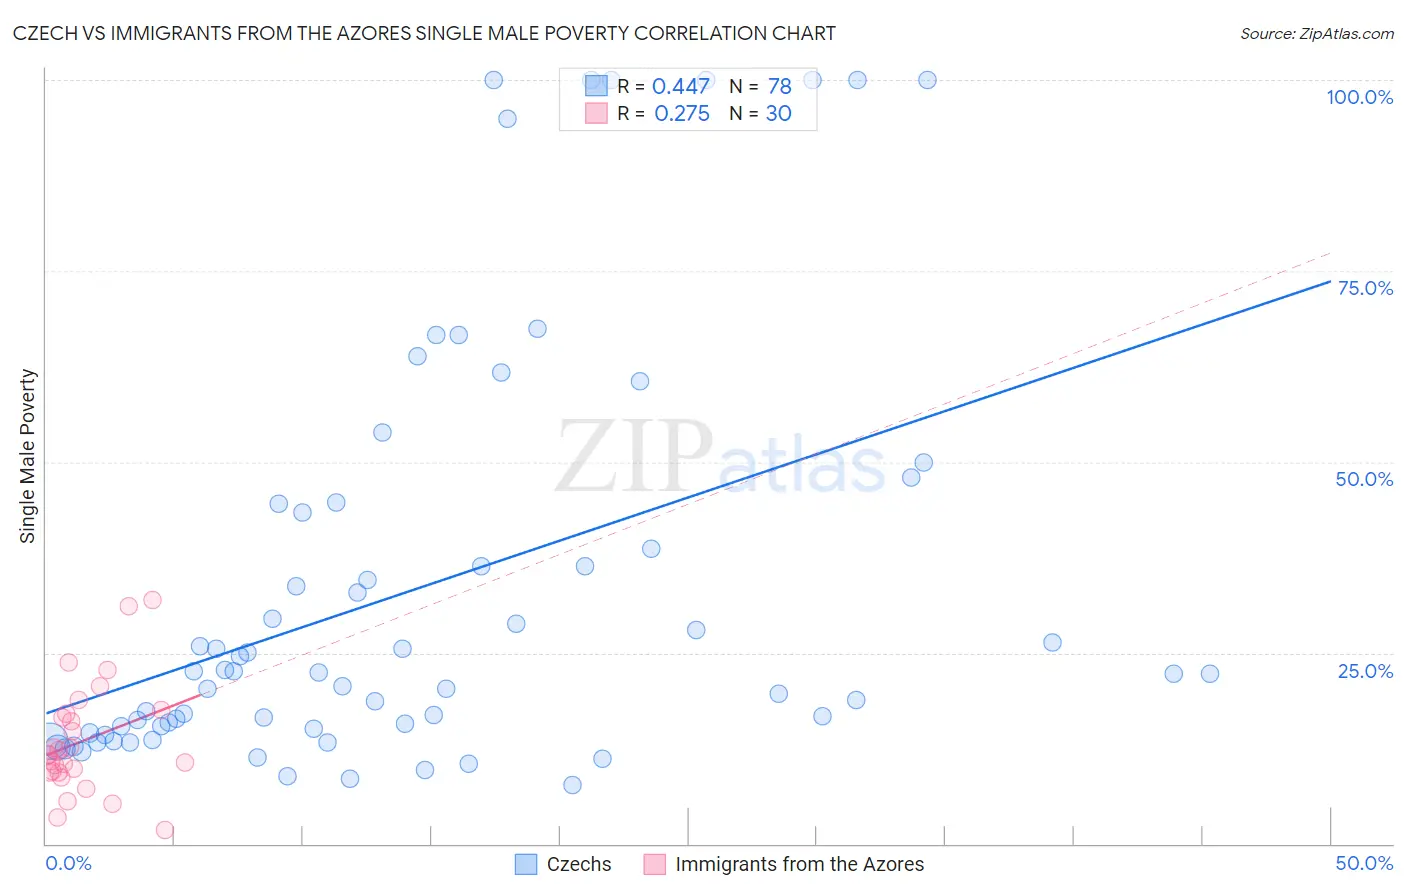 Czech vs Immigrants from the Azores Single Male Poverty